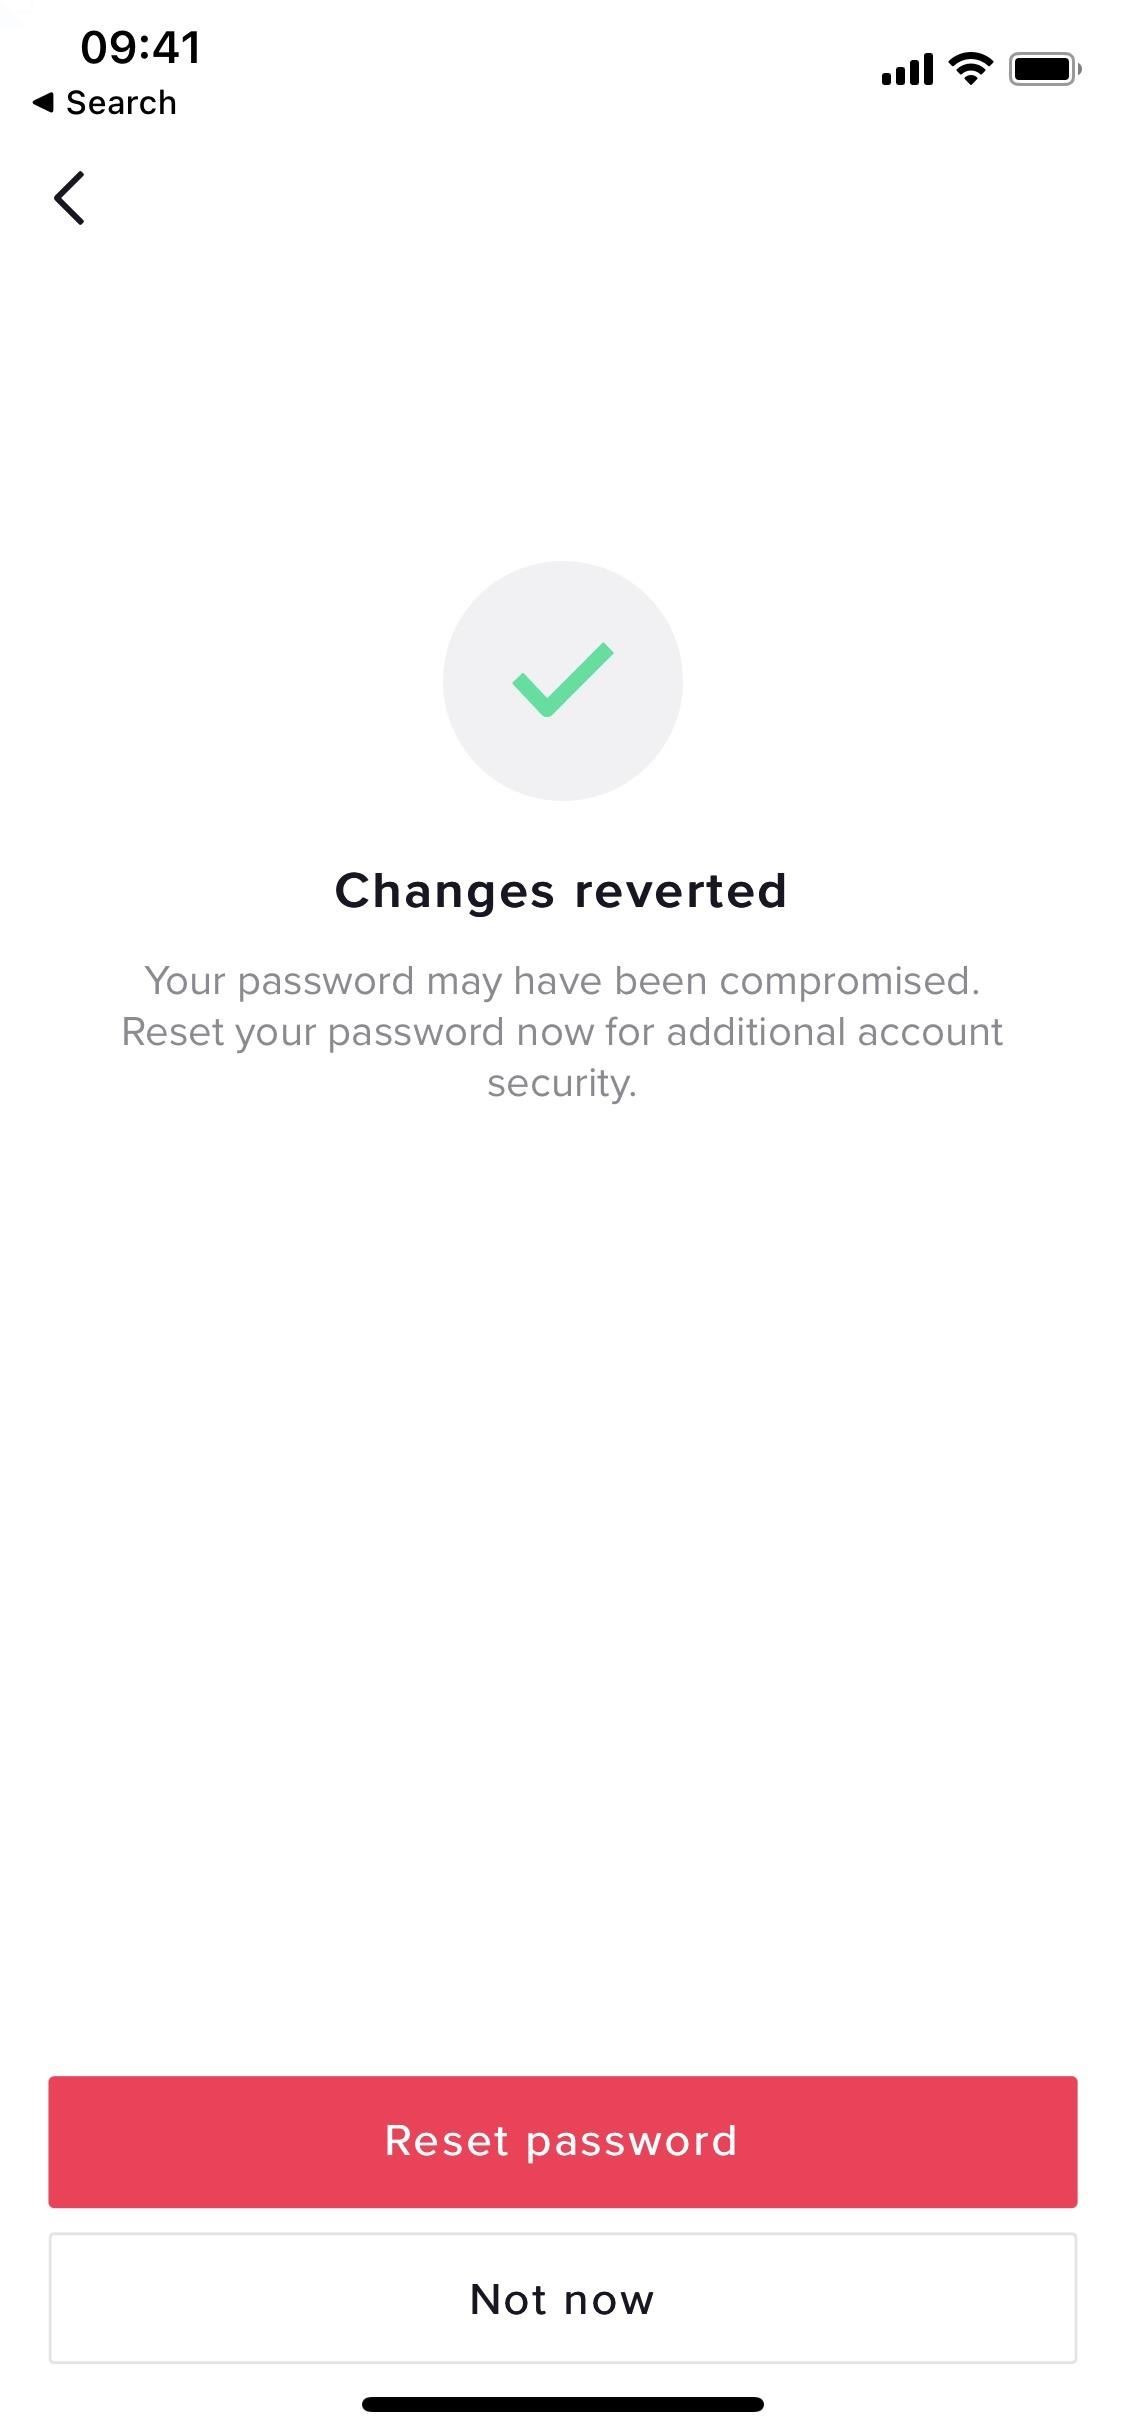 9 Things You Should Be Doing to Make Your TikTok Account Secure from Hackers